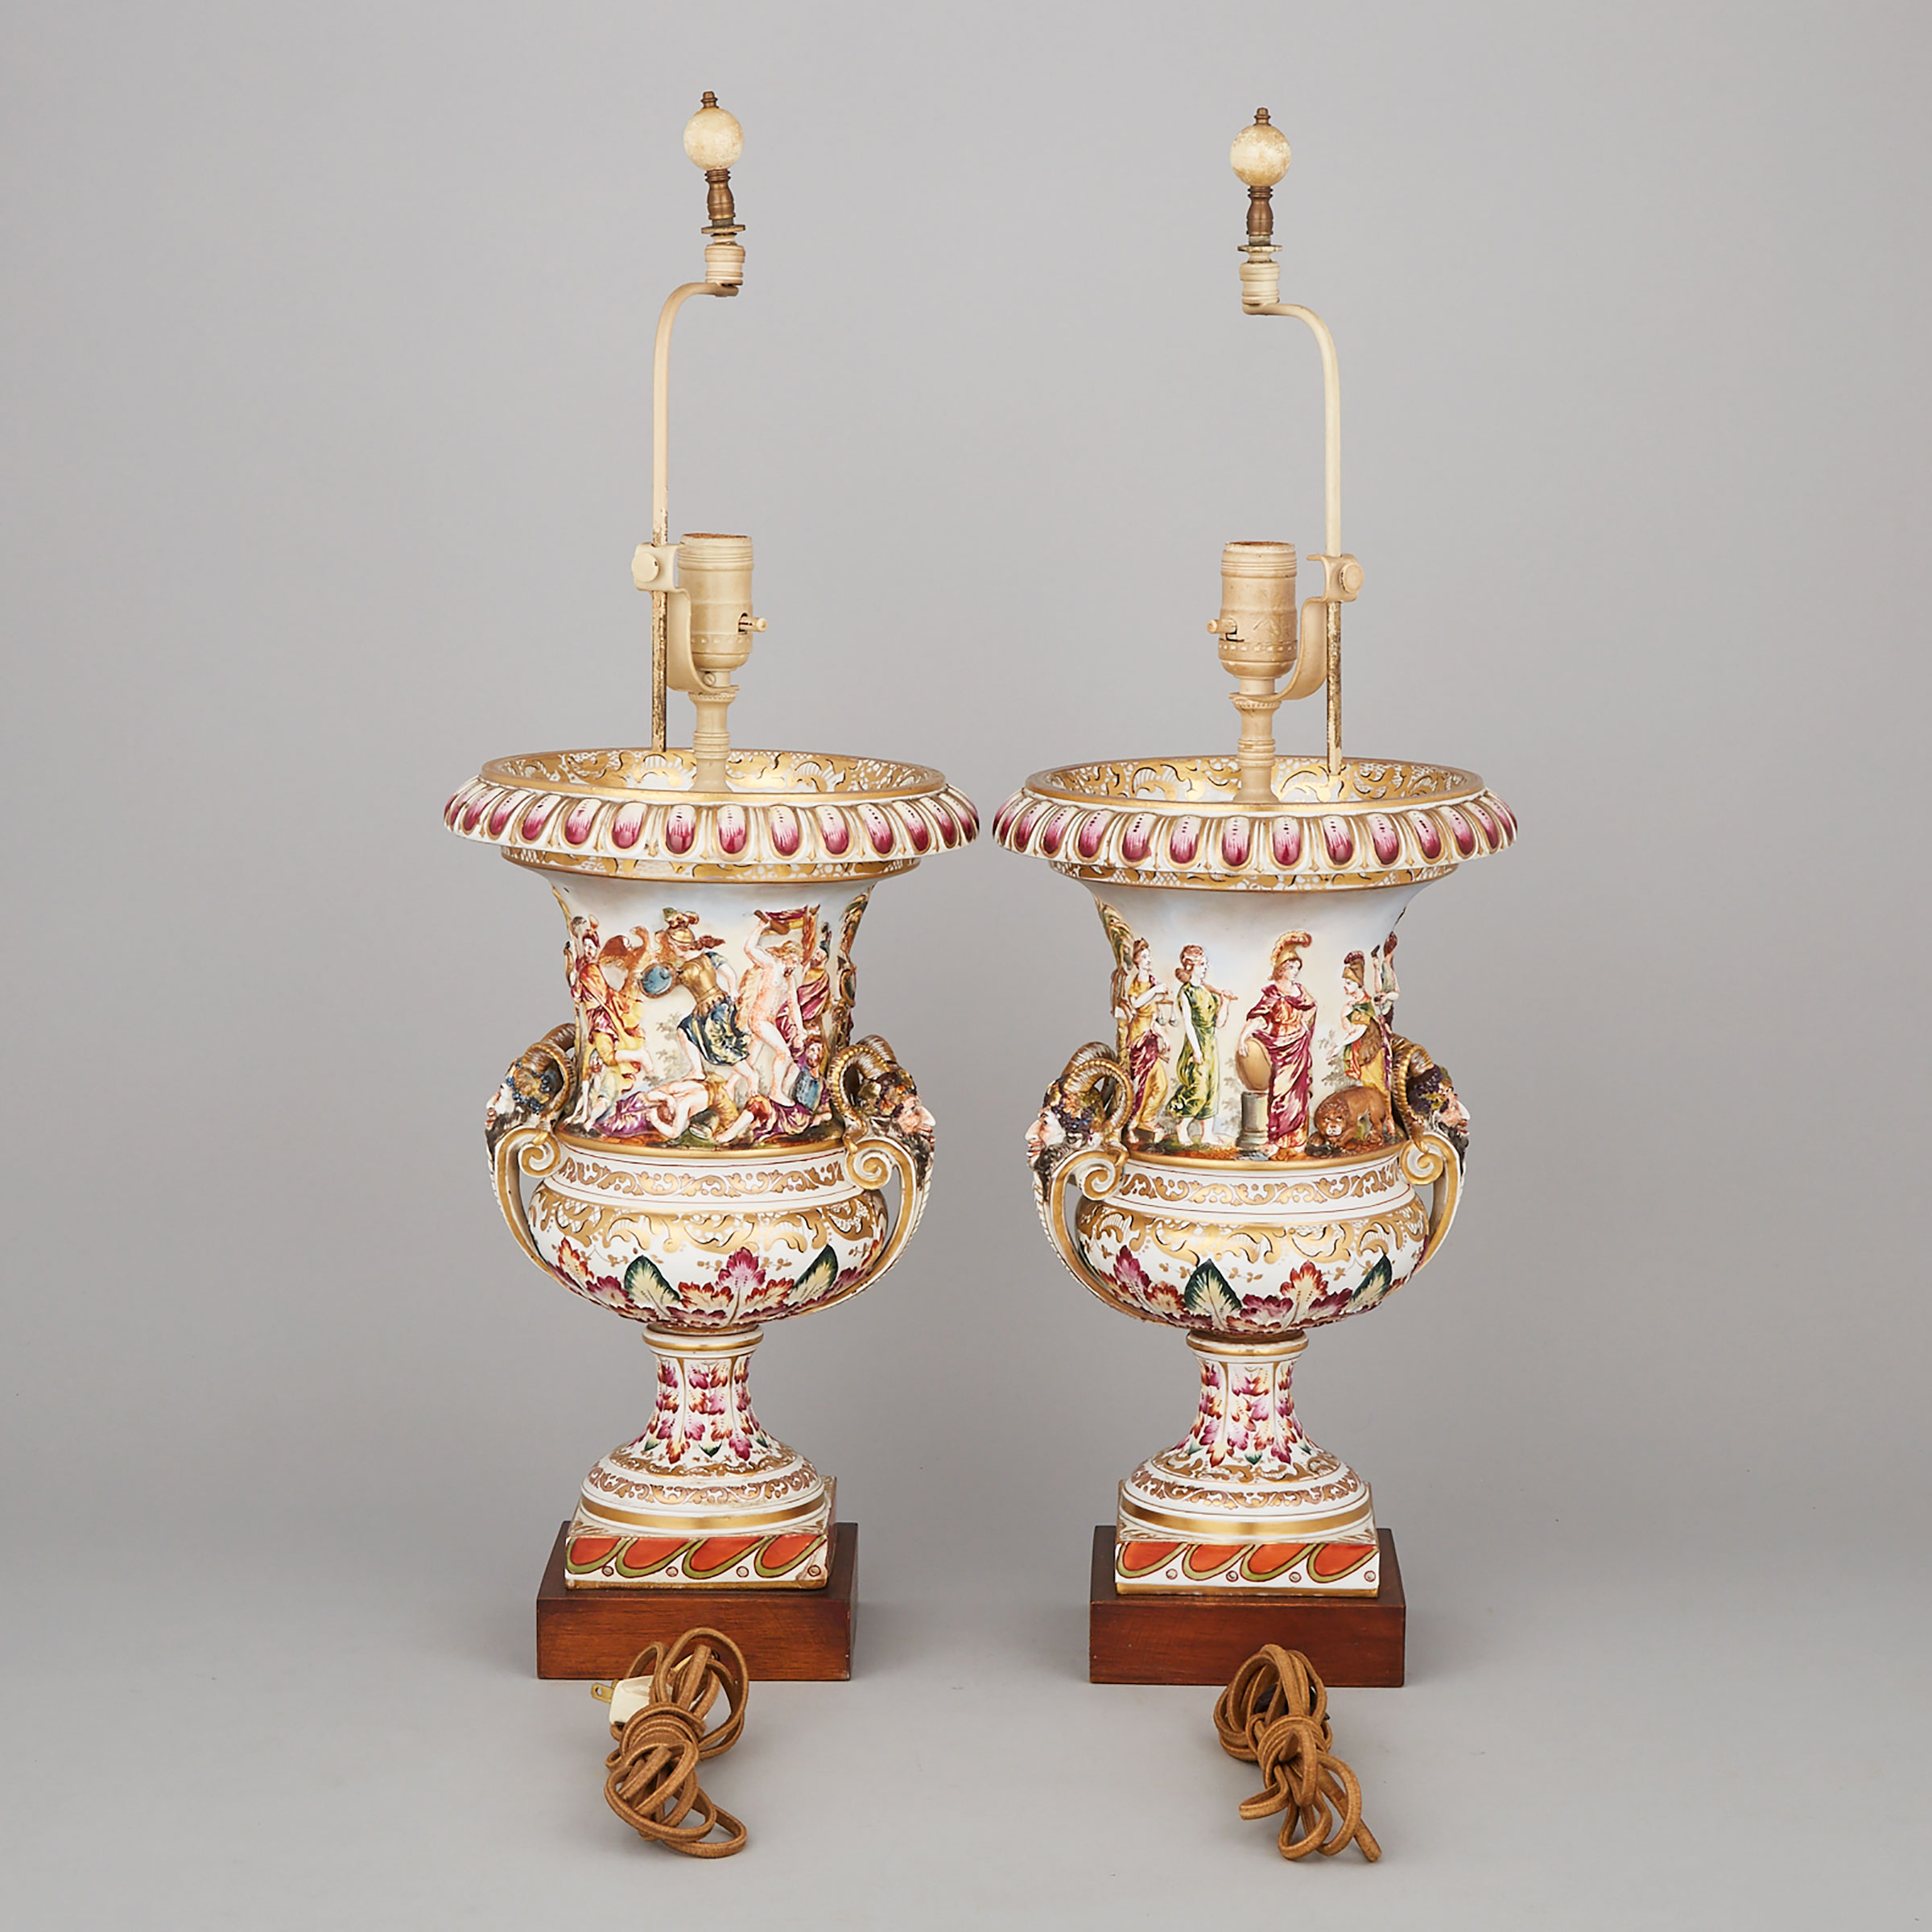 Pair of ‘Naples’ Urn-Form Table Lamps, 20th century